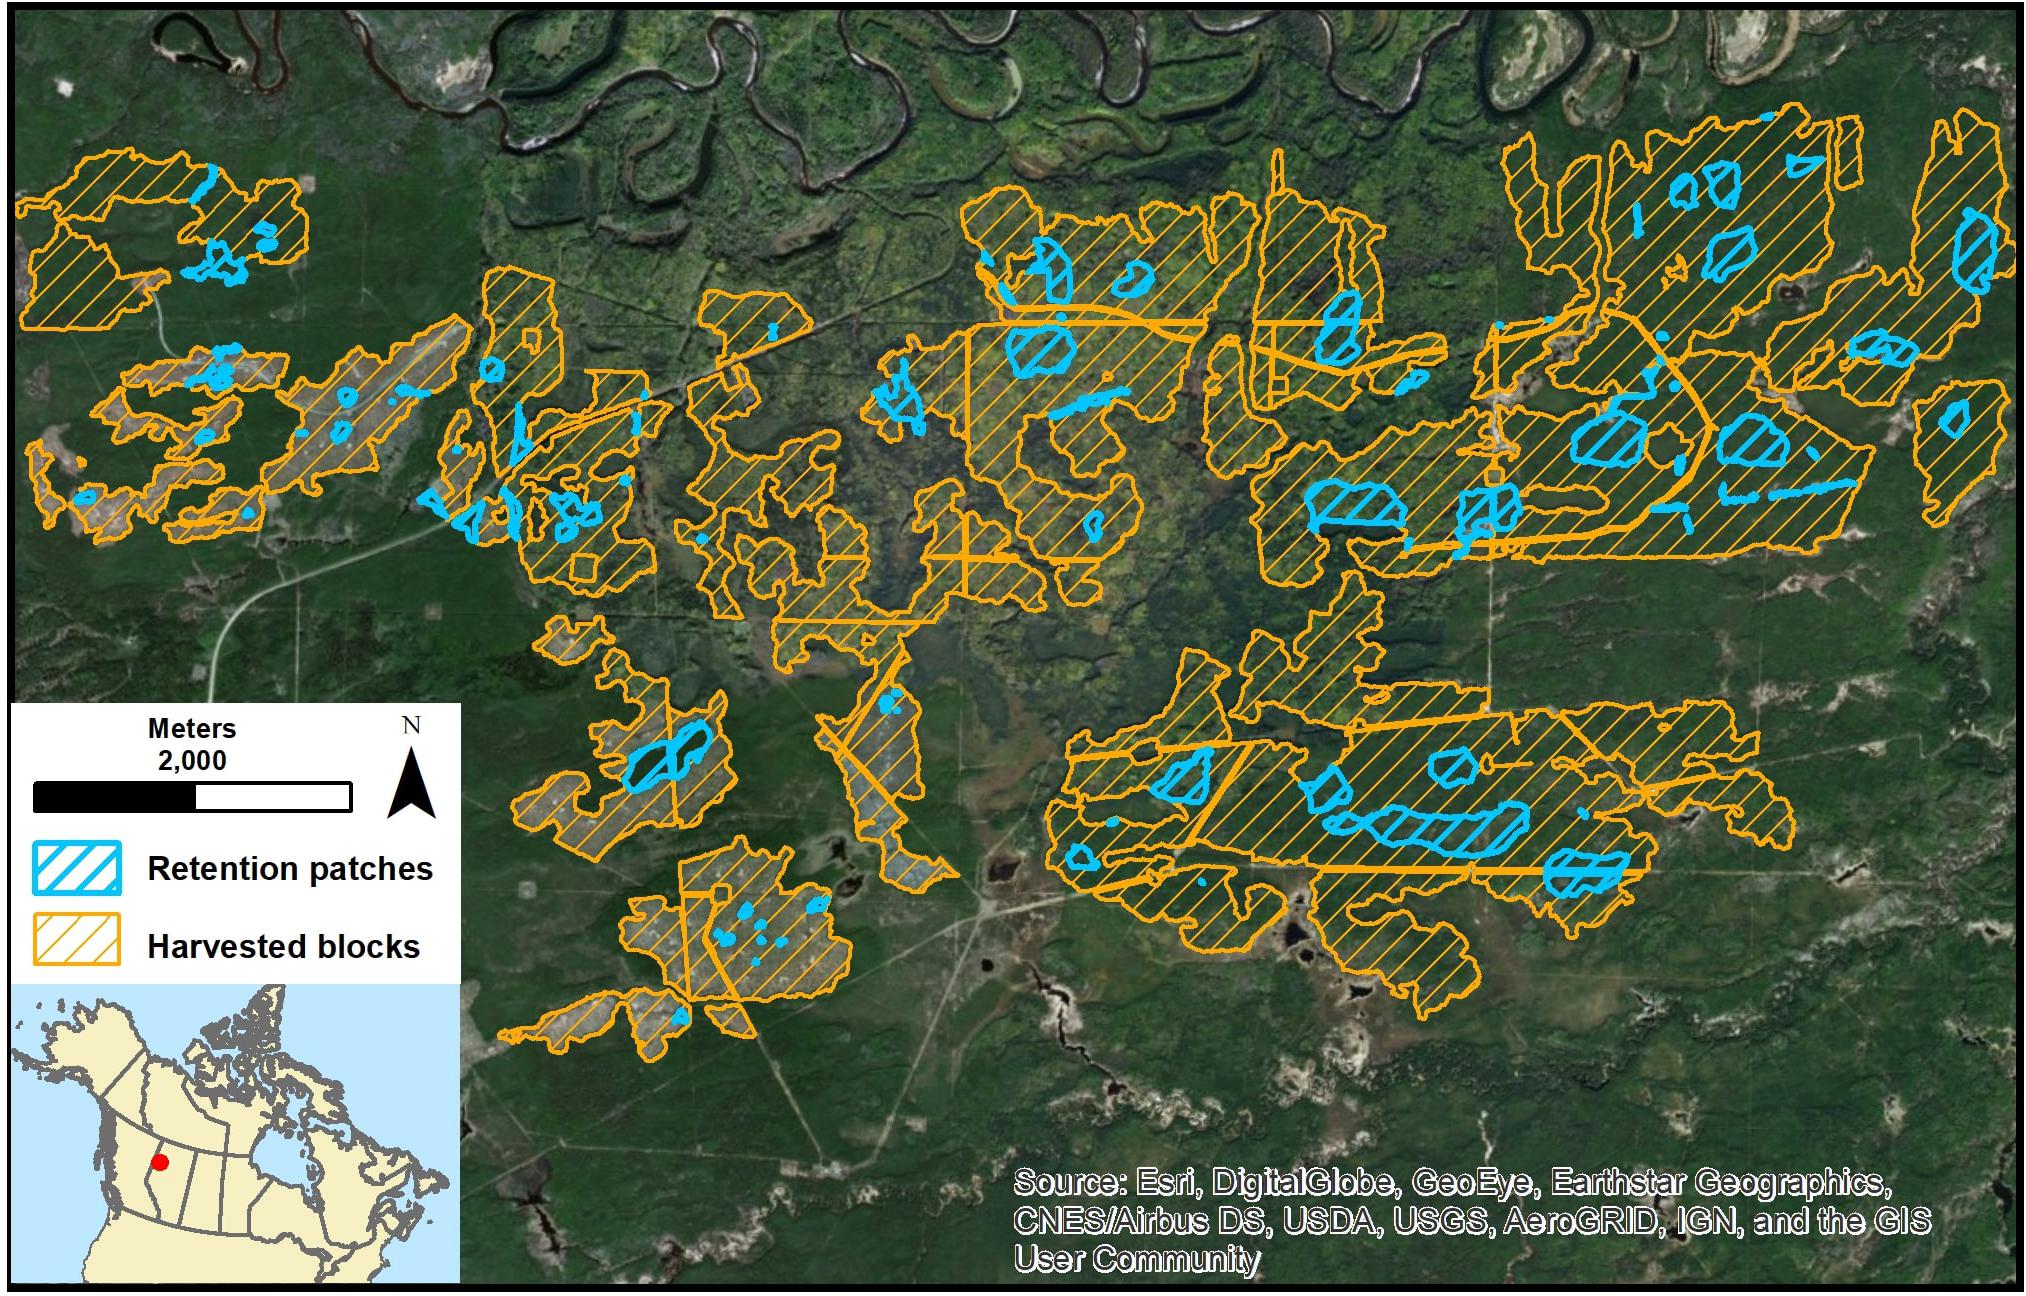 Frontiers Application Of The Conservation Planning Tool Zonation To Inform Retention Planning In The Boreal Forest Of Western Canada Ecology And Evolution